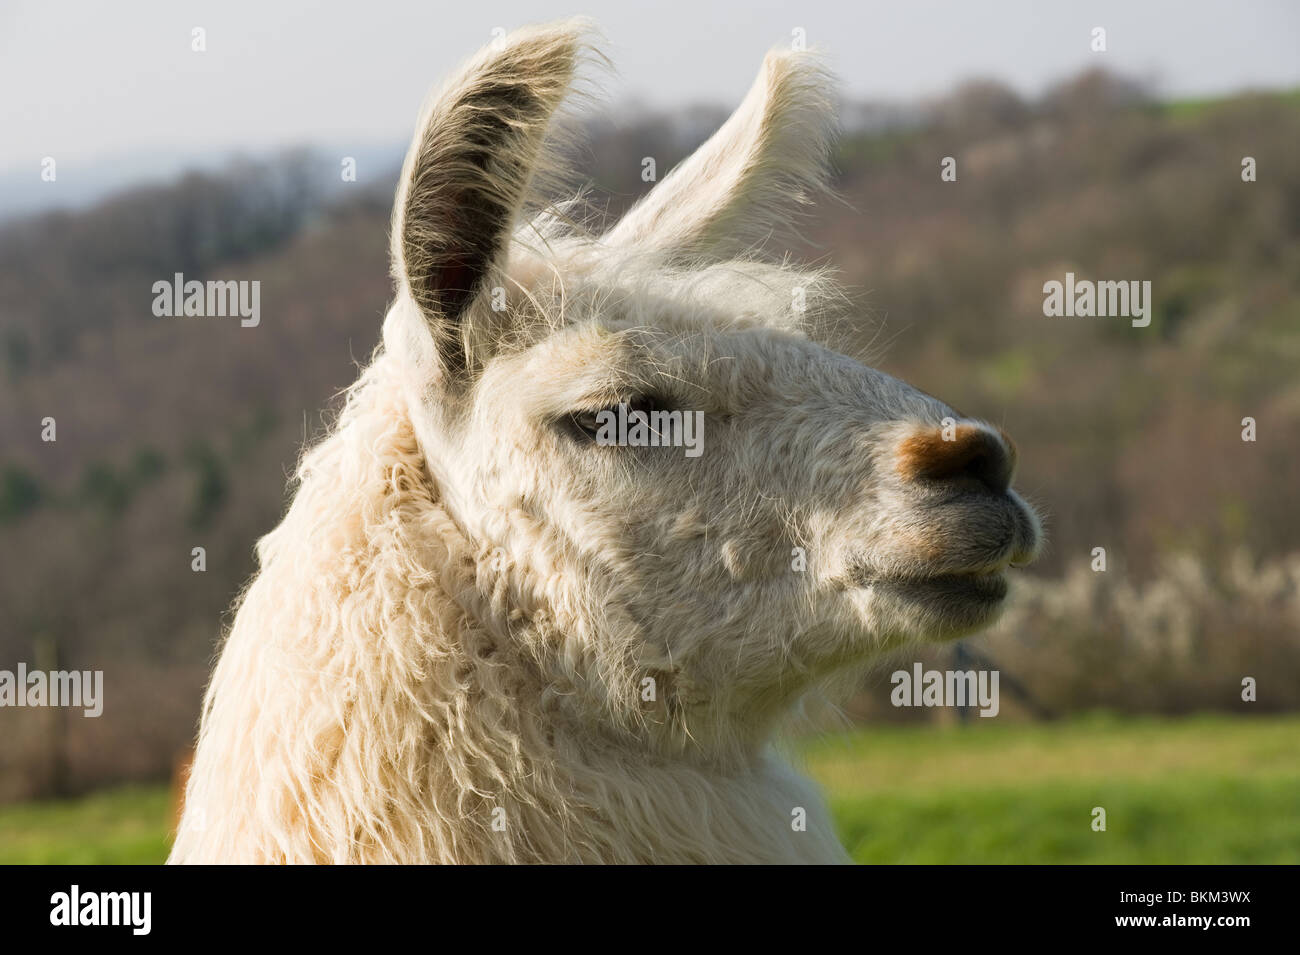 Closeup of a Llamas Head and Face with Ears Pricked Up in a Field in Laval Aveyron France Stock Photo